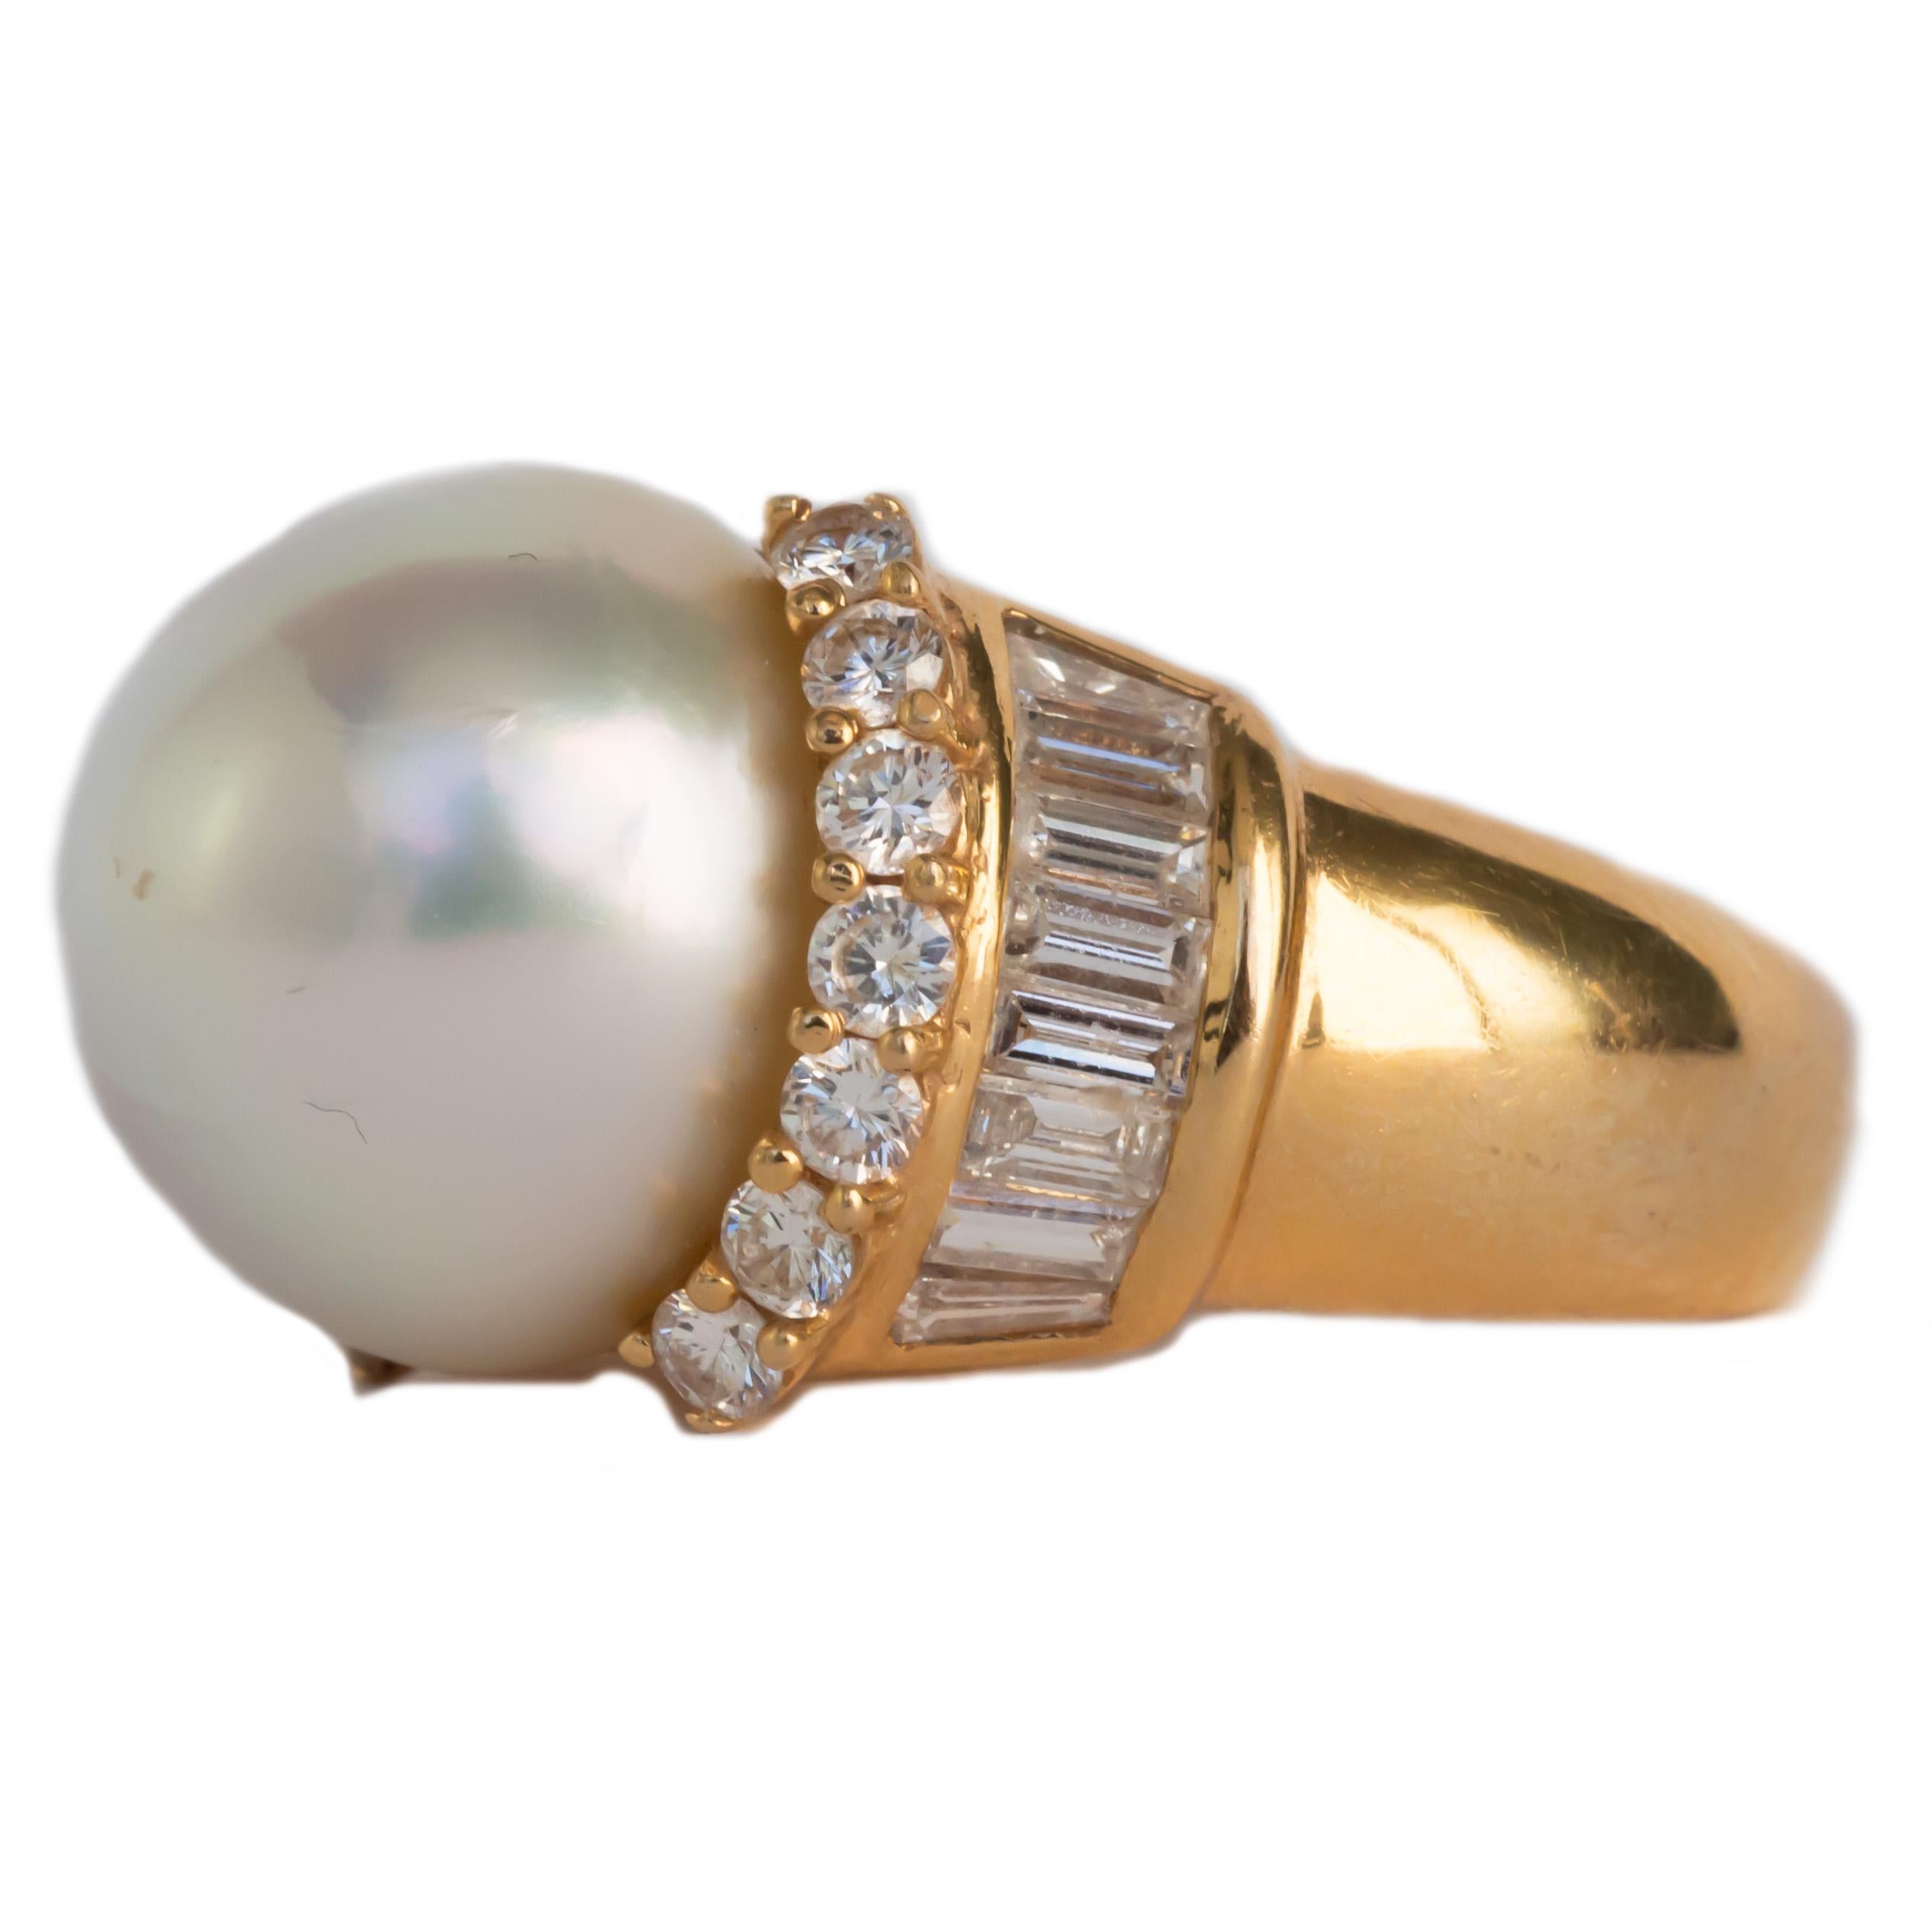 Item Details: 
Ring Size: 5
Metal Type: 18 karat Yellow Gold 
Weight: 13.0 grams

Center Diamond Details
GIA CERTIFIED Center Diamond
Shape: Natural Pearl
Dimensions: 14mm

Side Stone Details: 
Shape: Baguette and Round Diamonds 
Total Carat Weight: